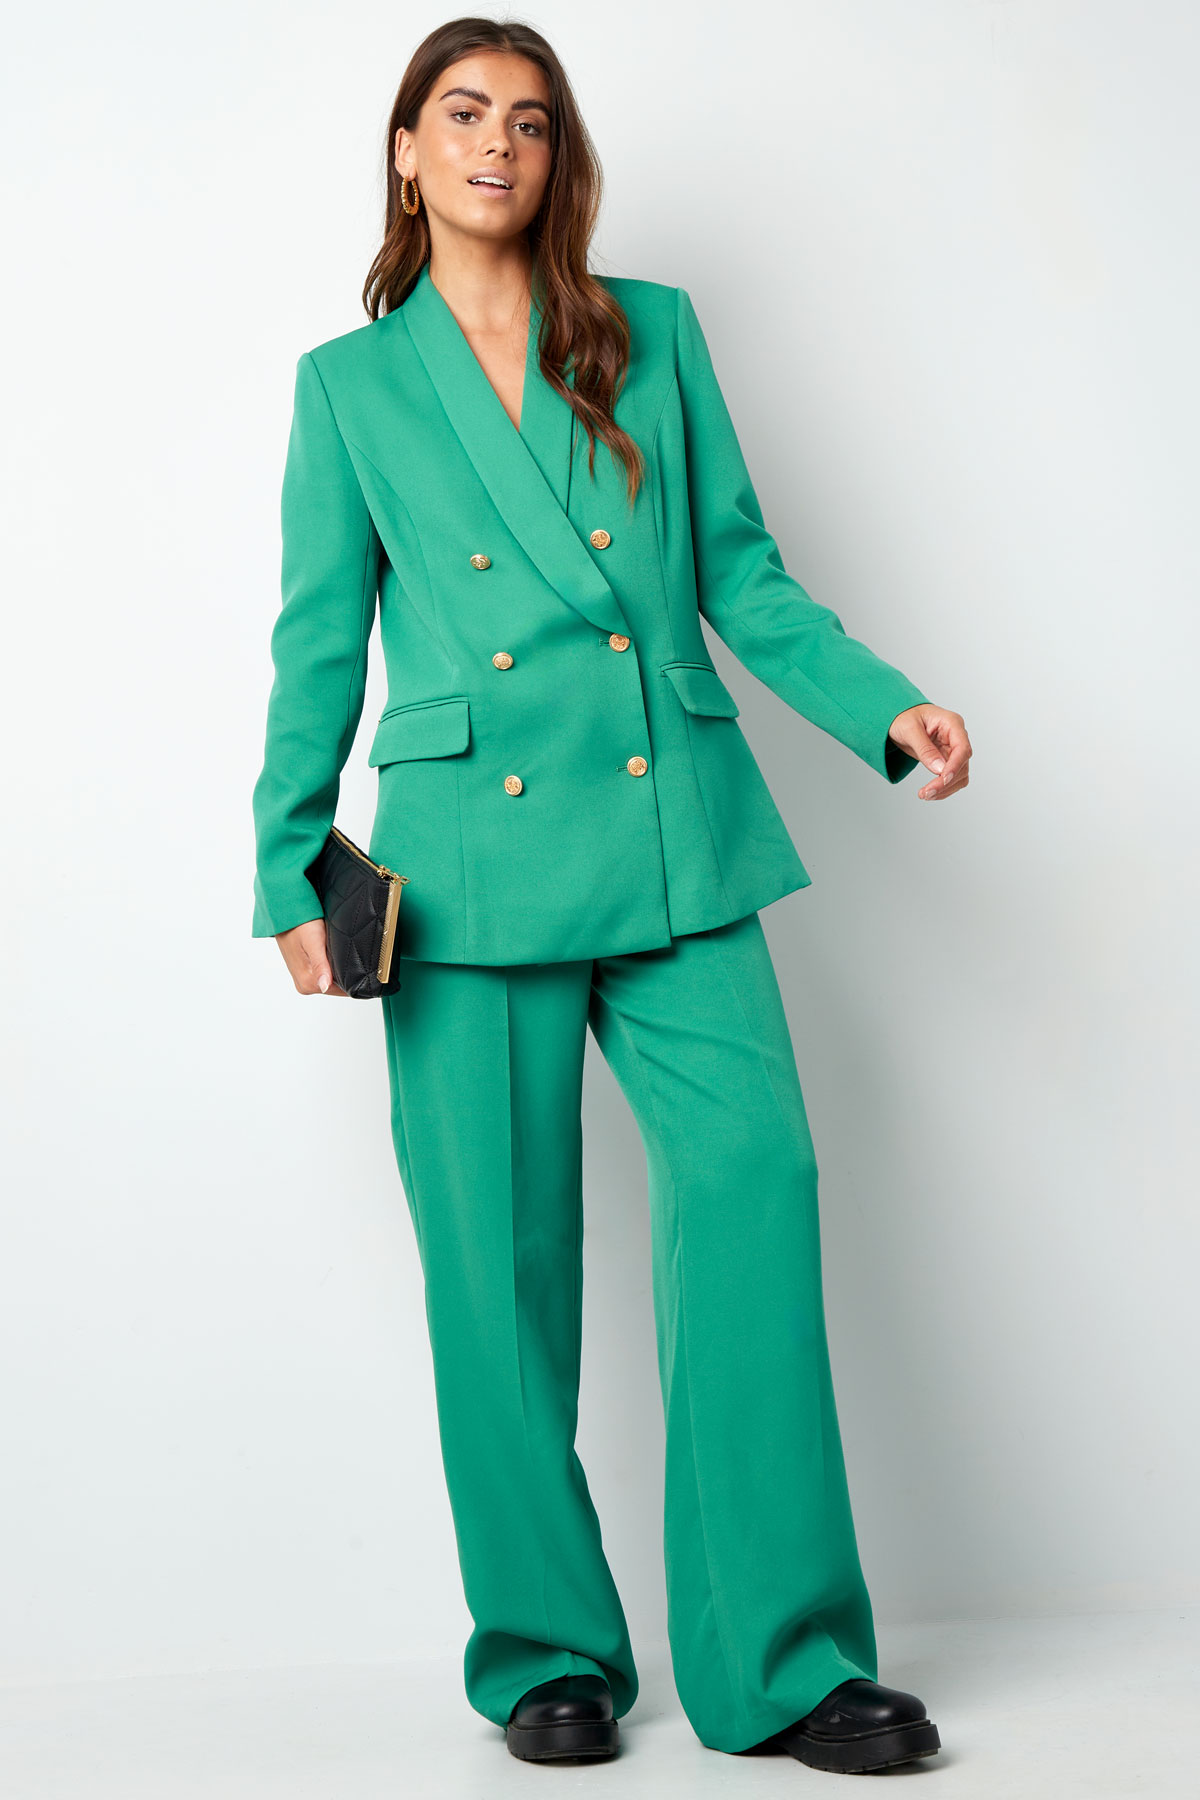 Oversized blazer gold buttons - green Picture7